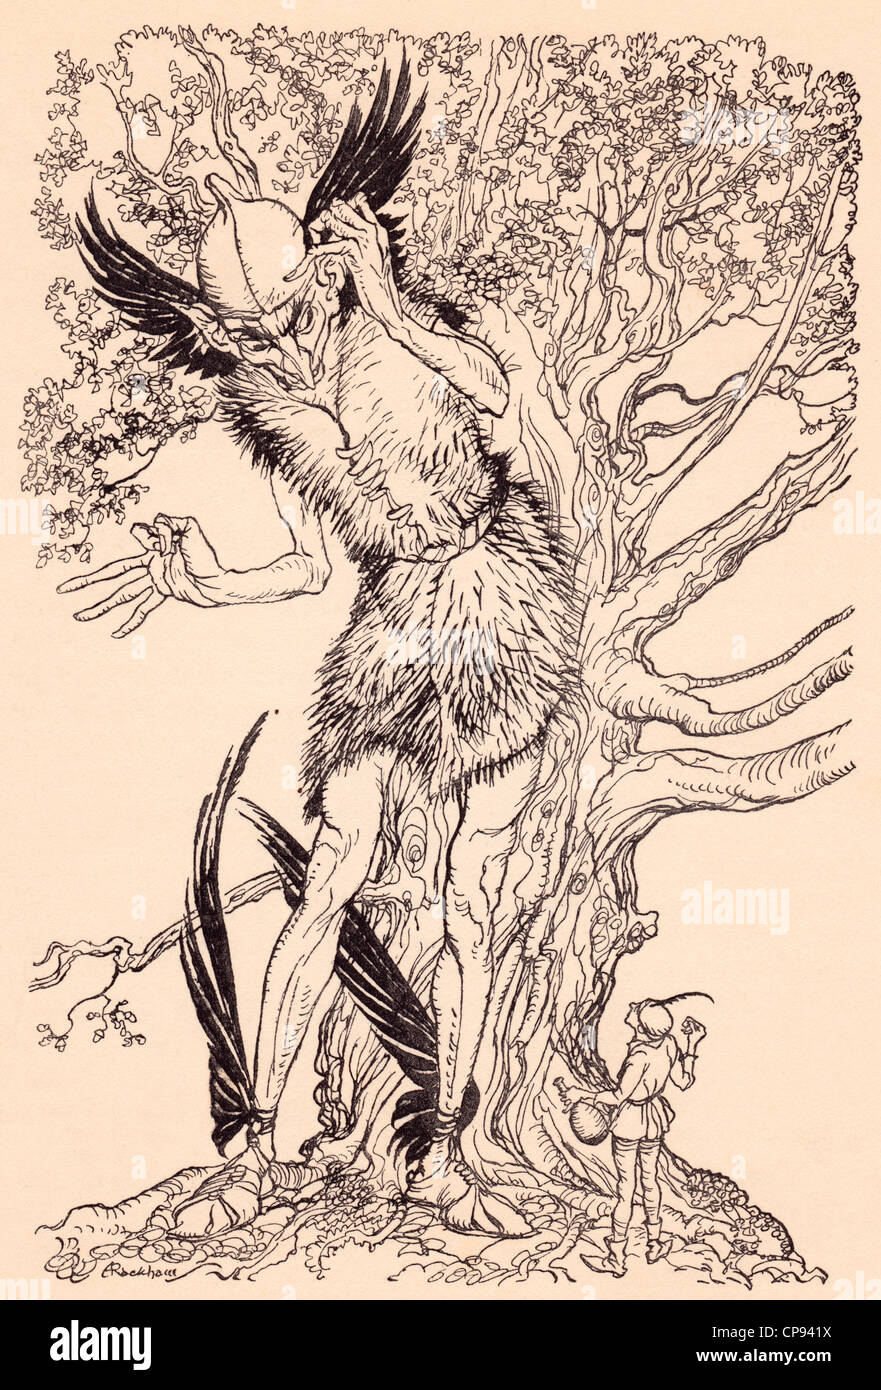 A terrible fellow half as big as the tree by which he was standing. Illustration by Arthur Rackham from Grimm's Fairy Tale Stock Photo